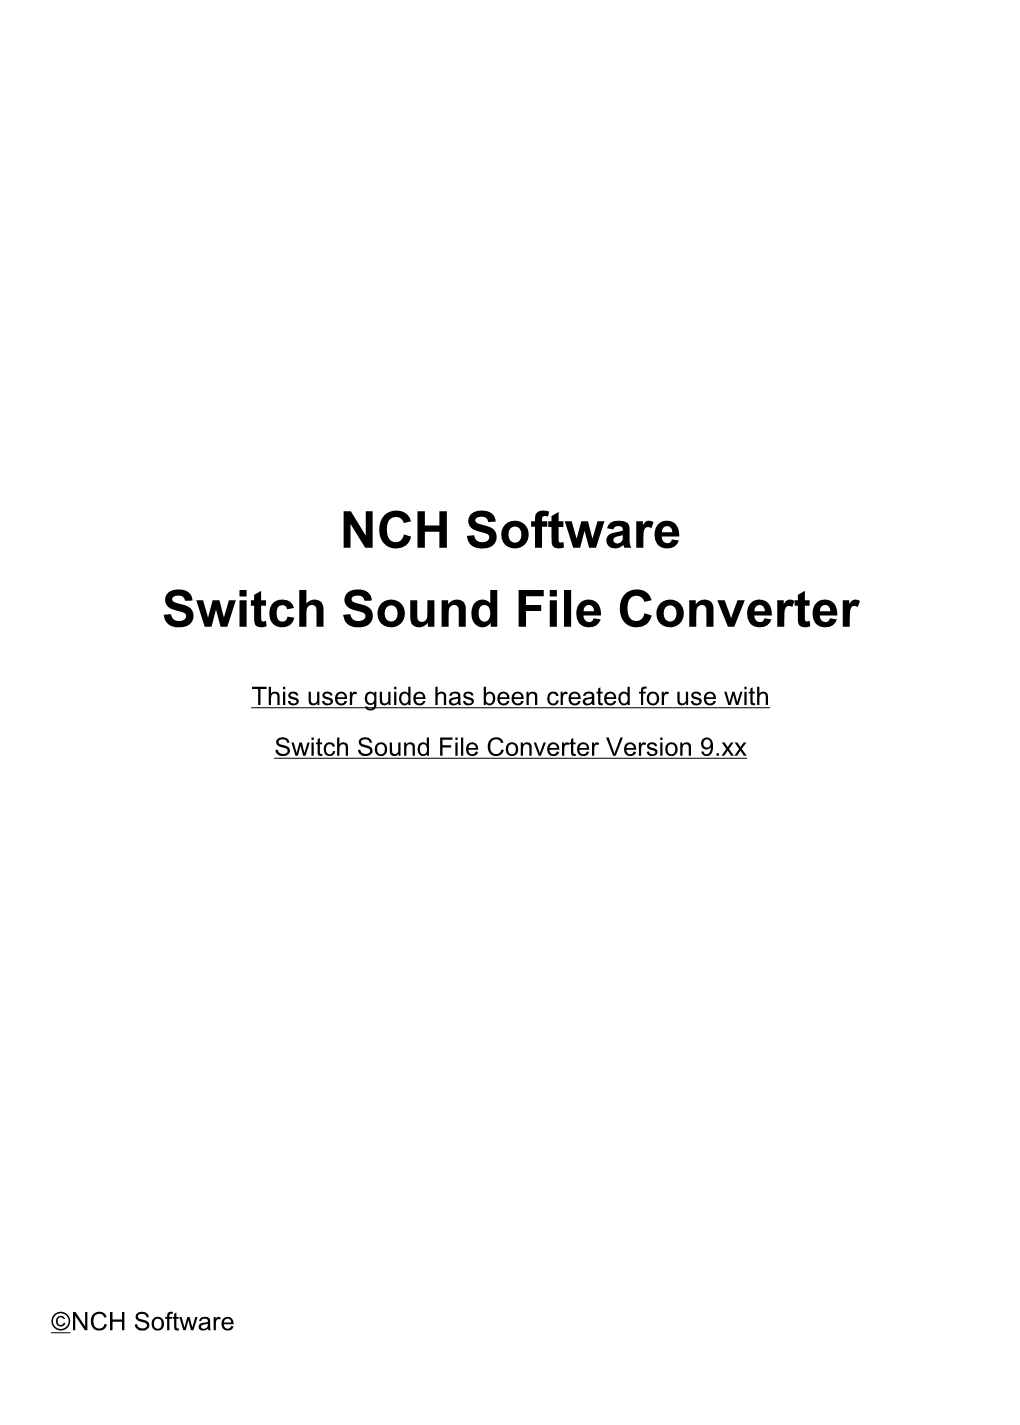 NCH Software Switch Sound File Converter